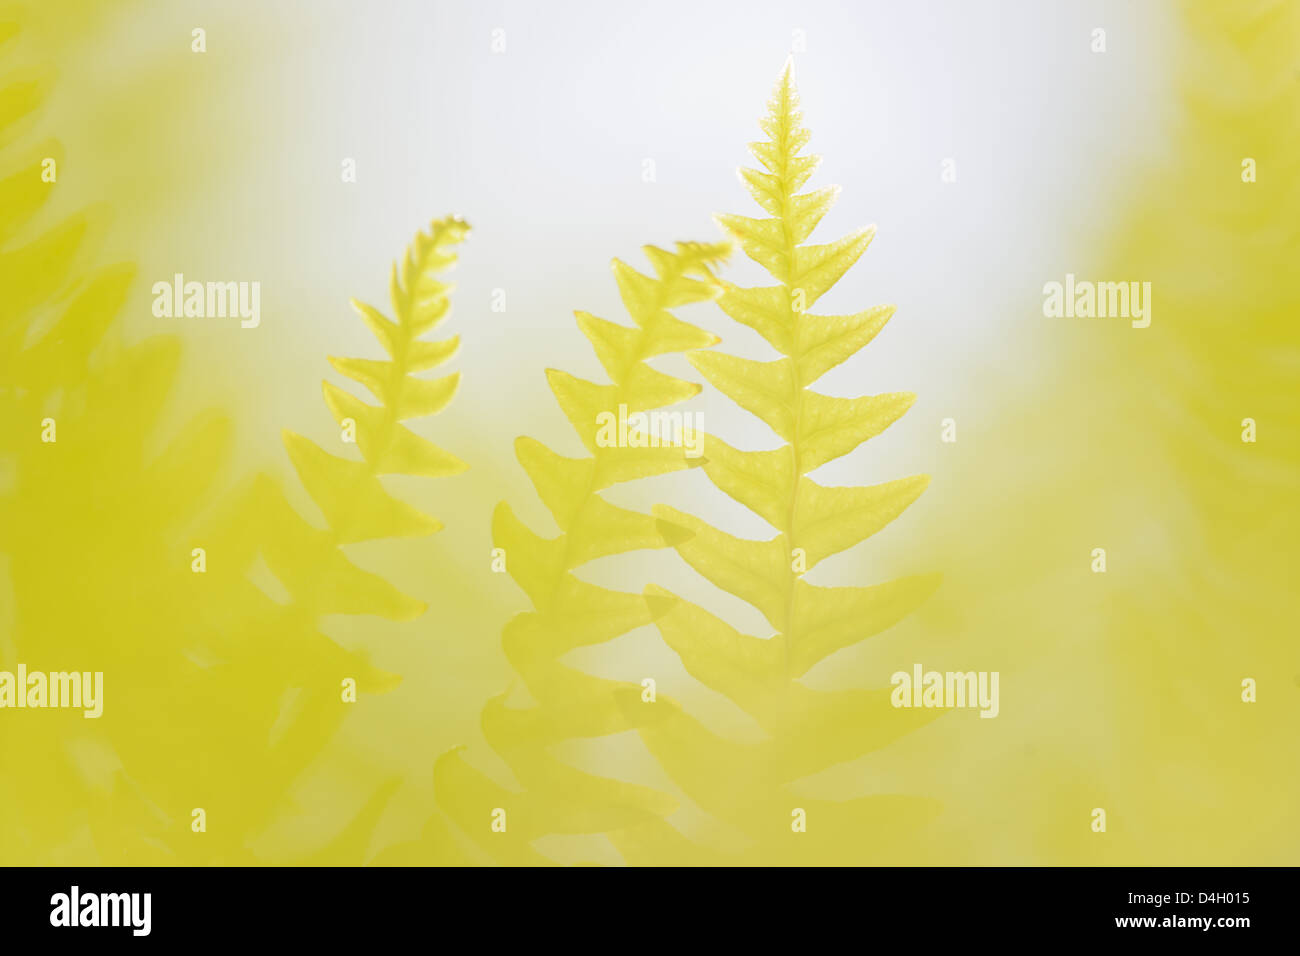 Misty yellow fern leaves in close up, Sweden, Europe Stock Photo